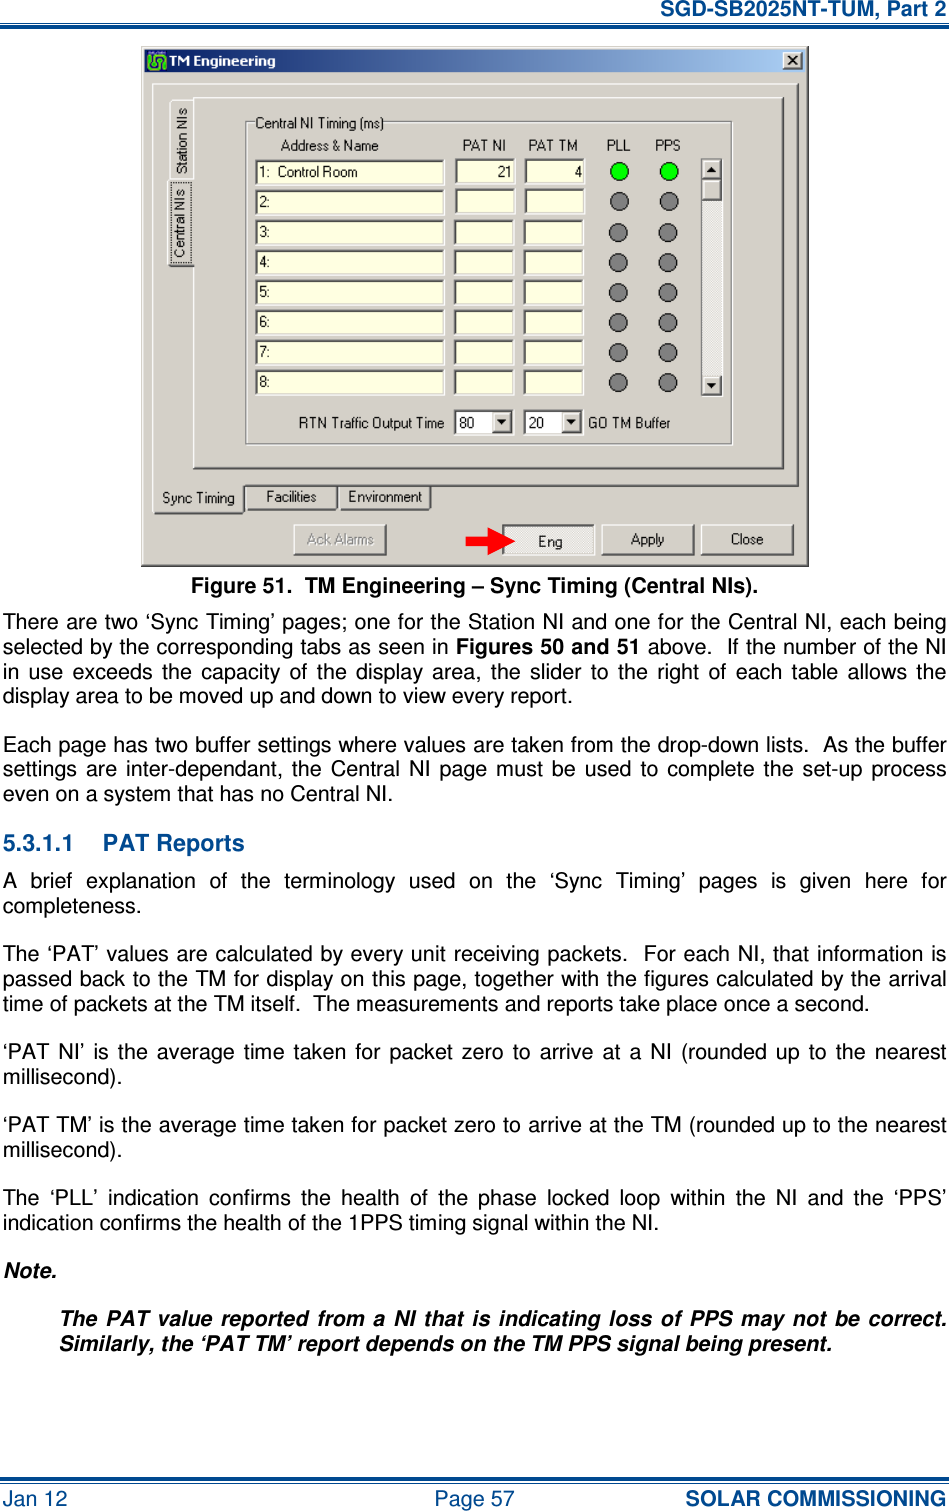   SGD-SB2025NT-TUM, Part 2 Jan 12  Page 57 SOLAR COMMISSIONING Figure 51.  TM Engineering – Sync Timing (Central NIs). There are two ‘Sync Timing’ pages; one for the Station NI and one for the Central NI, each being selected by the corresponding tabs as seen in Figures 50 and 51 above.  If the number of the NI in  use  exceeds  the  capacity  of  the  display  area,  the  slider  to  the  right  of  each  table  allows  the display area to be moved up and down to view every report. Each page has two buffer settings where values are taken from the drop-down lists.  As the buffer settings  are inter-dependant,  the  Central  NI  page  must  be  used  to  complete the  set-up  process even on a system that has no Central NI. 5.3.1.1  PAT Reports A  brief  explanation  of  the  terminology  used  on  the  ‘Sync  Timing’  pages  is  given  here  for completeness. The ‘PAT’ values are calculated by every unit receiving packets.  For each NI, that information is passed back to the TM for display on this page, together with the figures calculated by the arrival time of packets at the TM itself.  The measurements and reports take place once a second. ‘PAT  NI’  is  the  average  time  taken  for  packet zero  to  arrive  at  a  NI  (rounded up  to  the  nearest millisecond). ‘PAT TM’ is the average time taken for packet zero to arrive at the TM (rounded up to the nearest millisecond). The  ‘PLL’  indication  confirms  the  health  of  the  phase  locked  loop  within  the  NI  and  the  ‘PPS’ indication confirms the health of the 1PPS timing signal within the NI. Note. The PAT value reported  from a  NI that  is  indicating loss of  PPS may not  be  correct.  Similarly, the ‘PAT TM’ report depends on the TM PPS signal being present. 